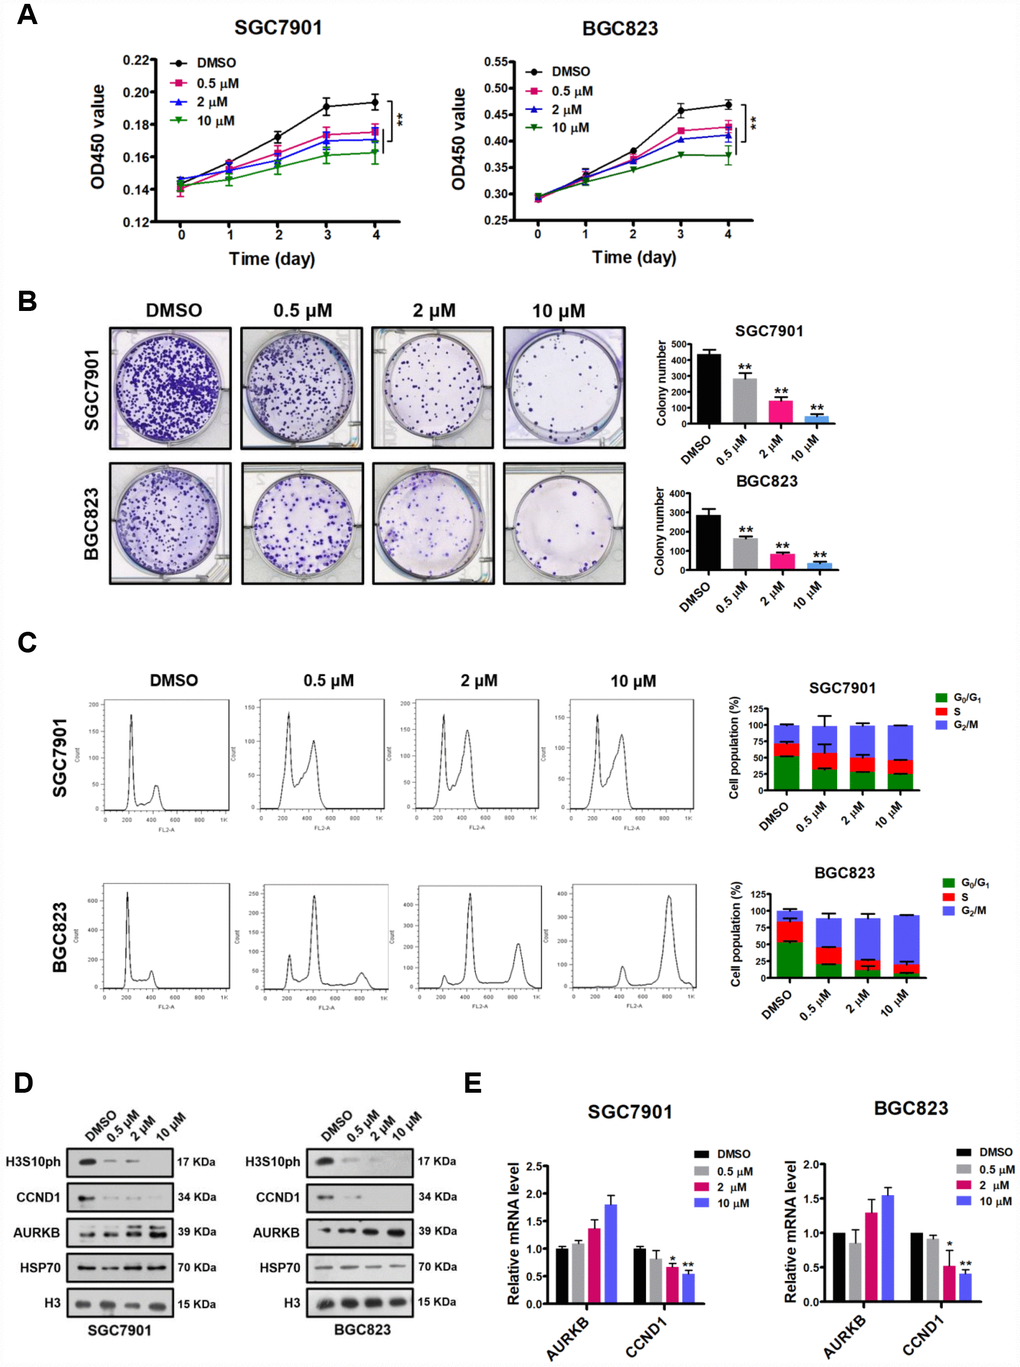 AZD1152 suppresses cell proliferation and represses the expression of CCND1 by inhibiting the enzymatic activity of AURKB in gastric cancer cells. (A) CCK-8 assays showing the effect of different concentrations of AZD1152 (0.5 μM, 2 μM and 10 μM; DMSO as the control) on the proliferation of SGC7901 and BGC823 cells. The results shown are the means ± SDs of three independent experiments; **, P B) Colony formation assays showing the effects of different concentrations of AZD1152 (0.5 μM, 2 μM and 10 μM; DMSO as the control) on the colony formation ability of SGC7901 and BGC823 cells. Left panel, representative images from colony formation assays. Right panel, the number of colonies formed by the indicated cells was quantified. Data are presented as the means ± SDs; **, PC) Flow cytometry analysis showing the effect of different concentrations of AZD1152 (0.5 μM, 2 μM and 10 μM; DMSO as the control) on the cell cycle distribution. Bar graphs showing the percentages of SGC7901 and BGC823 cells in the G0/G1, S and G2/M phases when treated with different concentrations of AZD1152 (right panel). Each histogram bar represents the mean ± SD of three independent experiments. (D) Western blot analysis of the protein levels of AURKB, CCND1 and H3S10ph in SGC7901 and BGC823 cells treated with different concentrations of AZD1152 (0.5 μM, 2 μM and 10 μM; DMSO as the control). HSP70 and histone H3 were used as the endogenous loading controls. (E) Quantitative real-time PCR analysis of AURKB and CCND1 expression in SGC7901 and BGC823 cells treated with different concentrations of AZD1152 (0.5 μM, 2 μM and 10 μM; DMSO as the control); *, P 